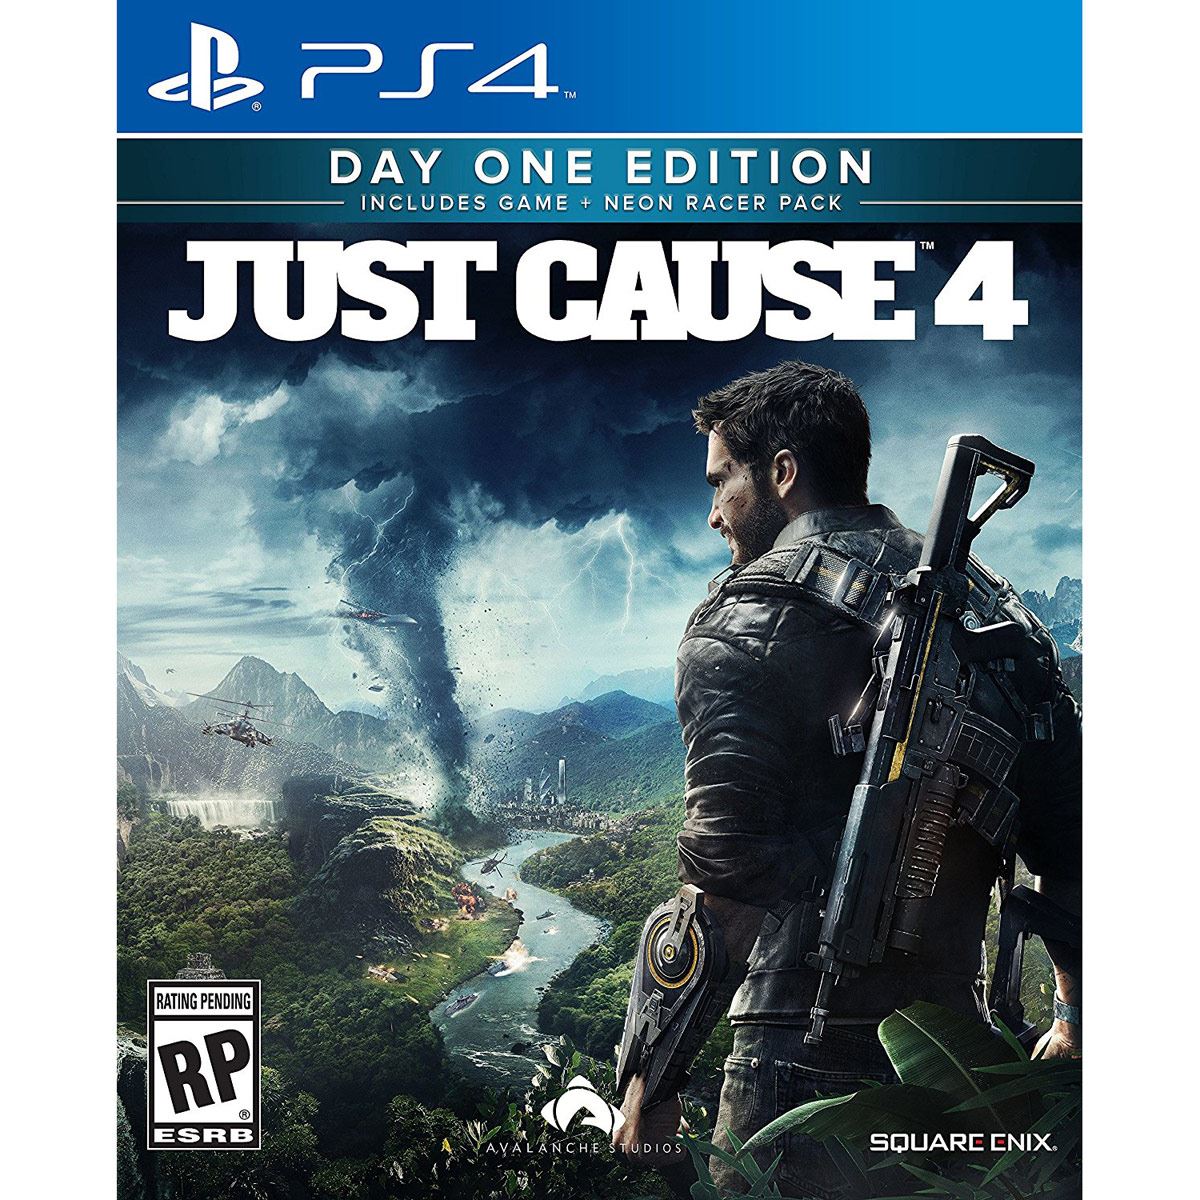 PS4 Just Cause 4 Limited Edition